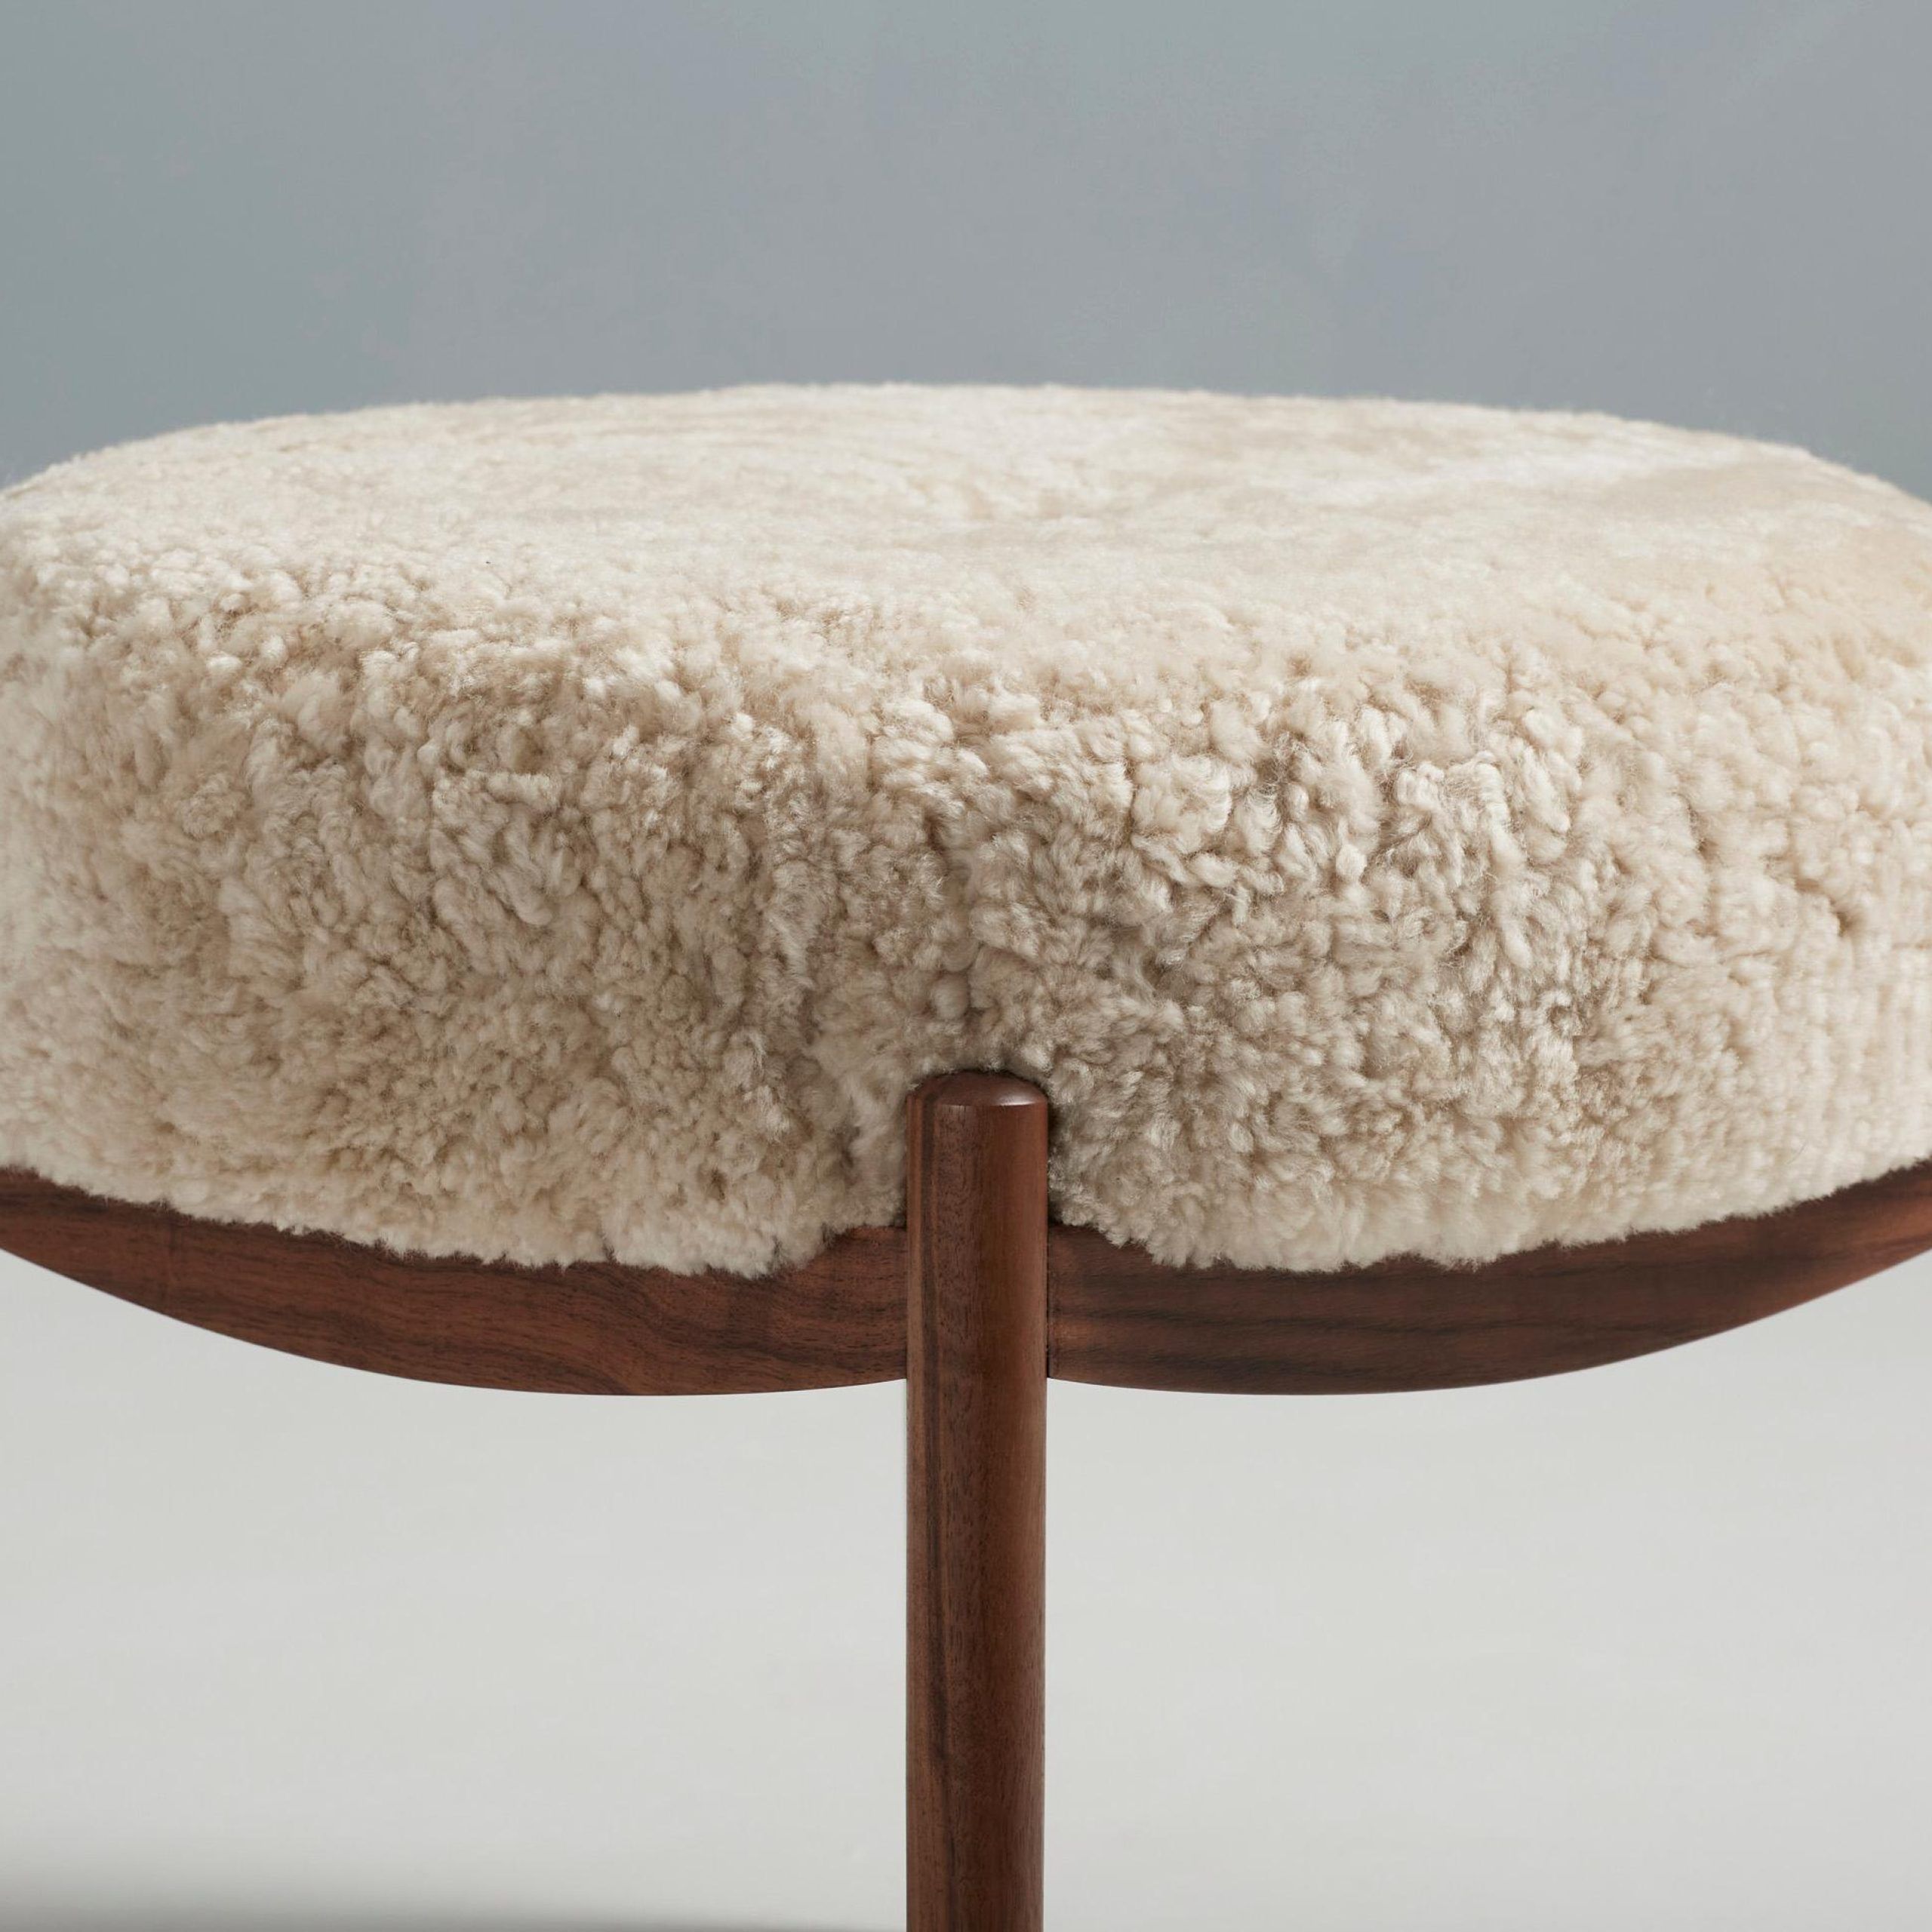 Custom Made Walnut And Shearling Round Ottoman For Sale At 1stdibs Inside Satin Black Shearling Ottomans (View 9 of 15)